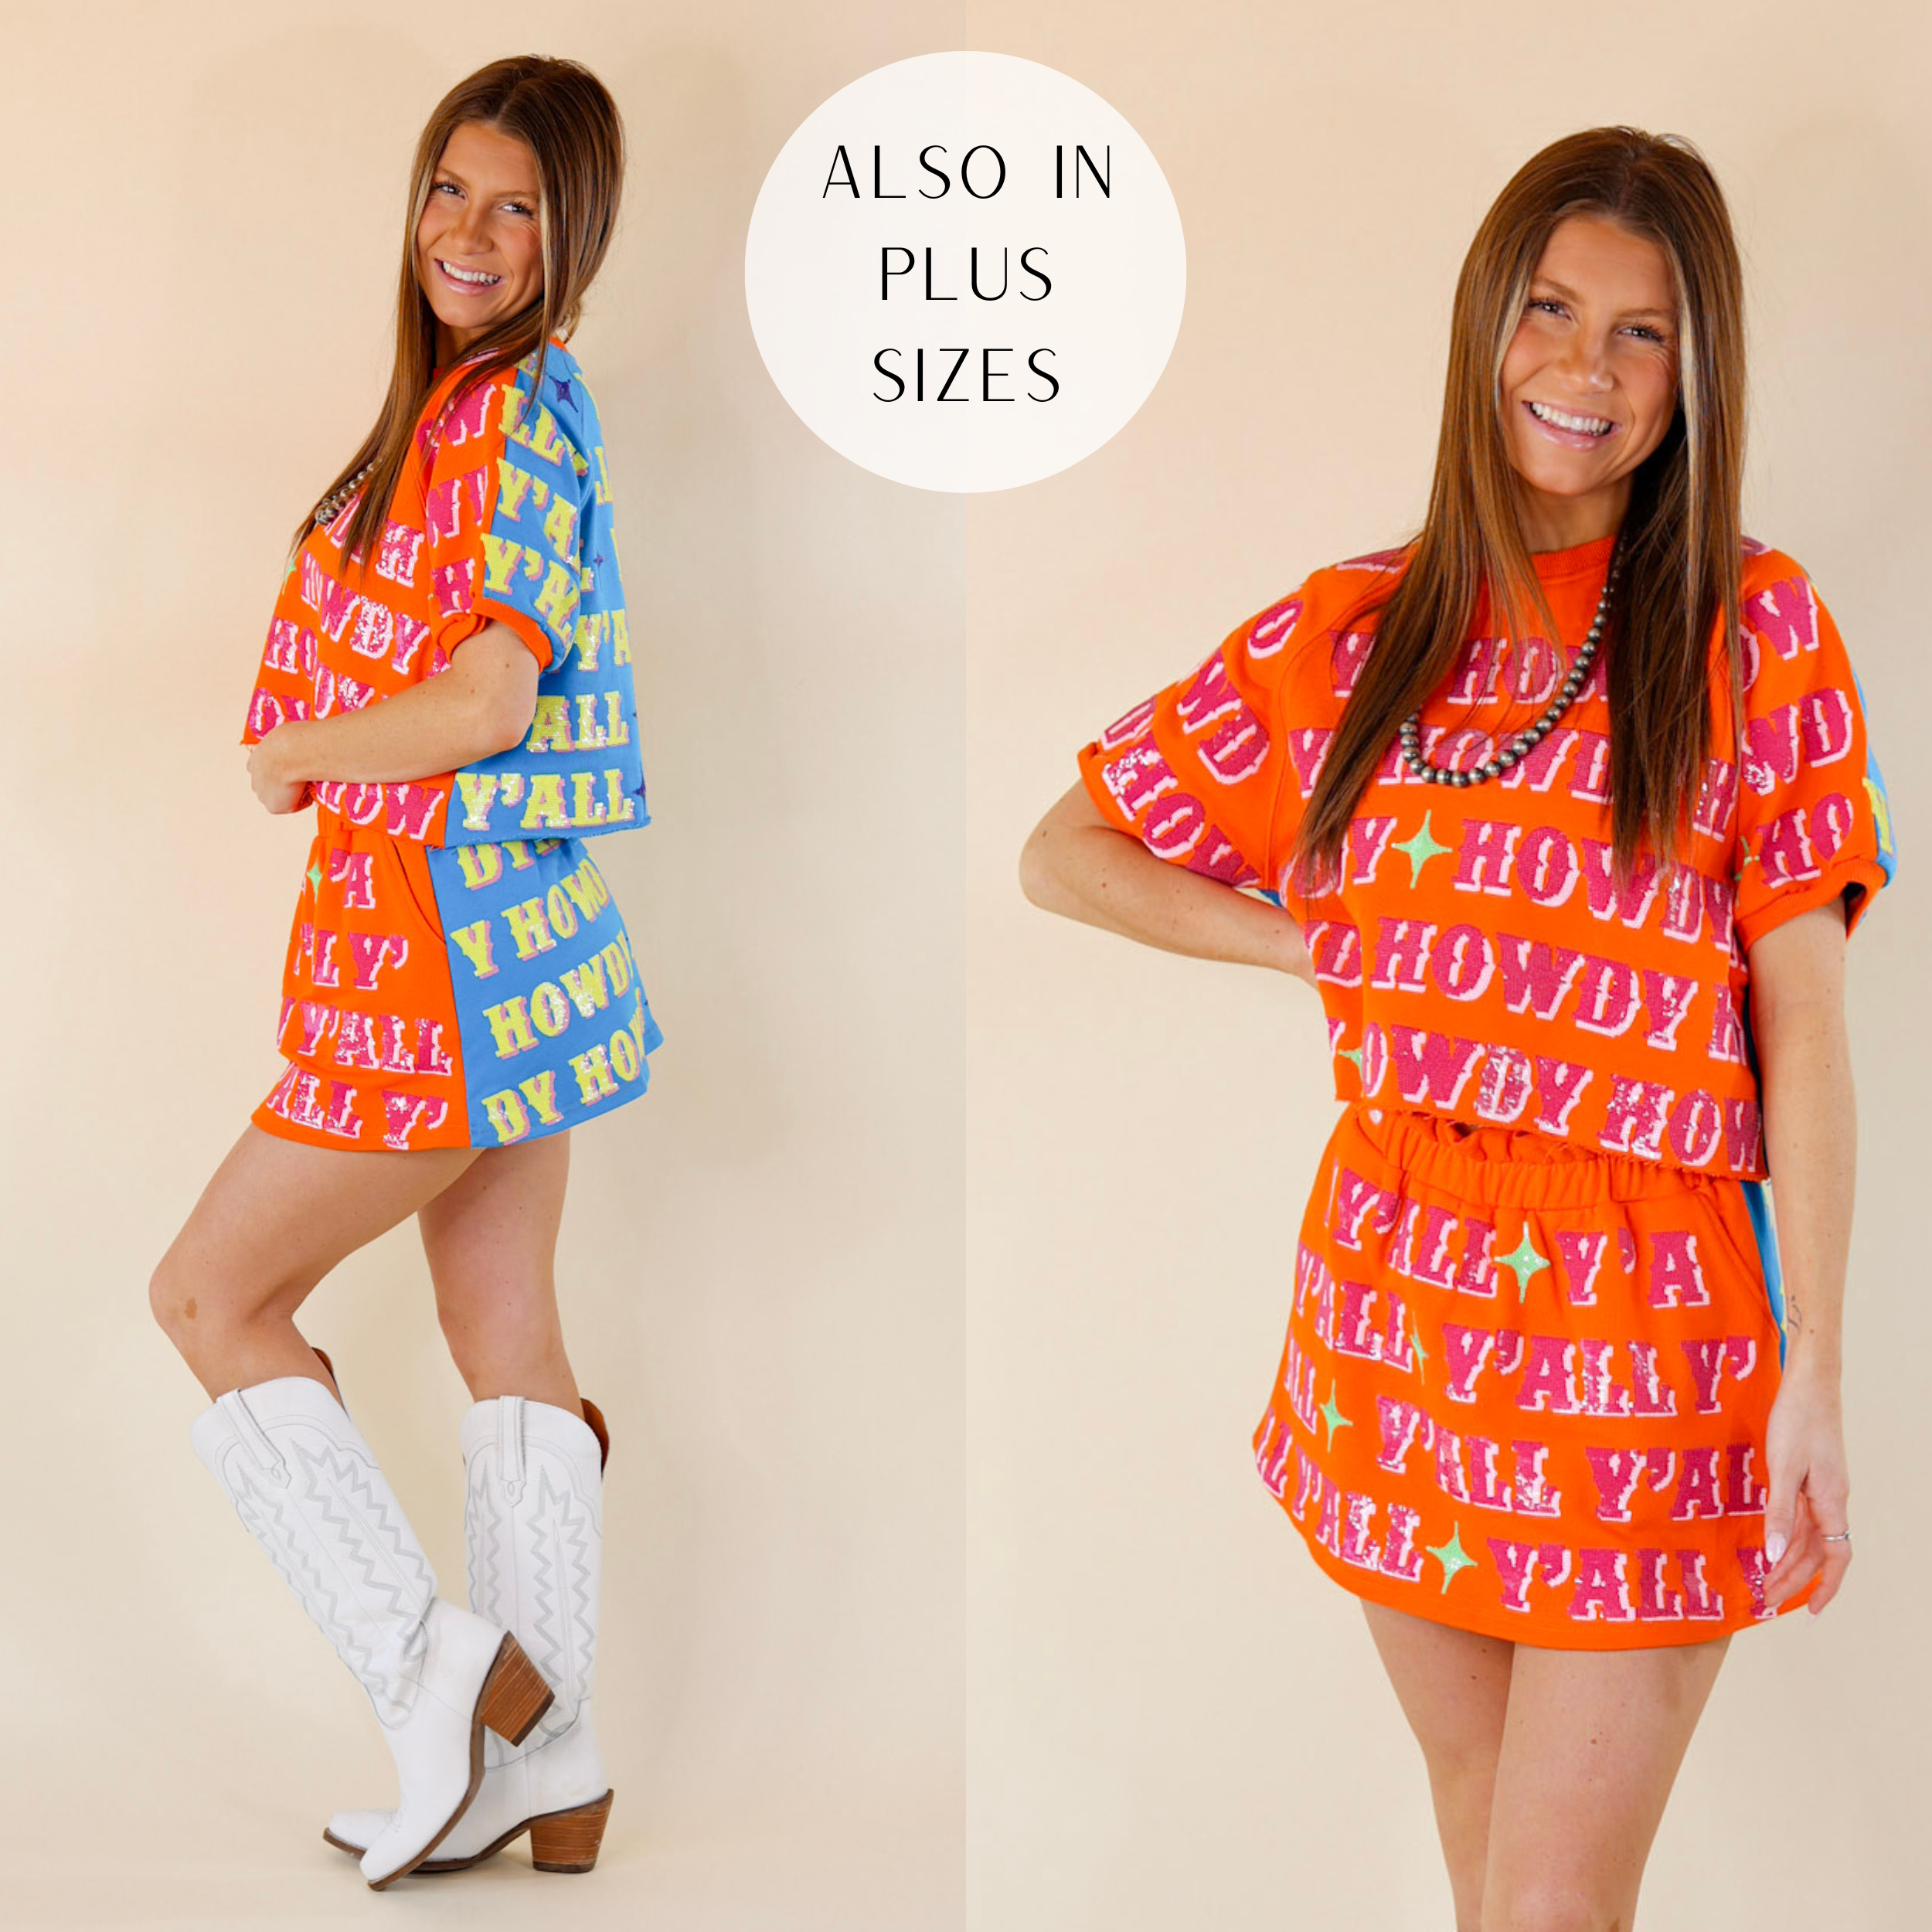 Model is wearing a colorblock short sleeve top with the words "Howdy" and "Yall" in pink and yellow on orange and blue fabric. Model has it paired with white boots, matching skort, silver jewelry. 